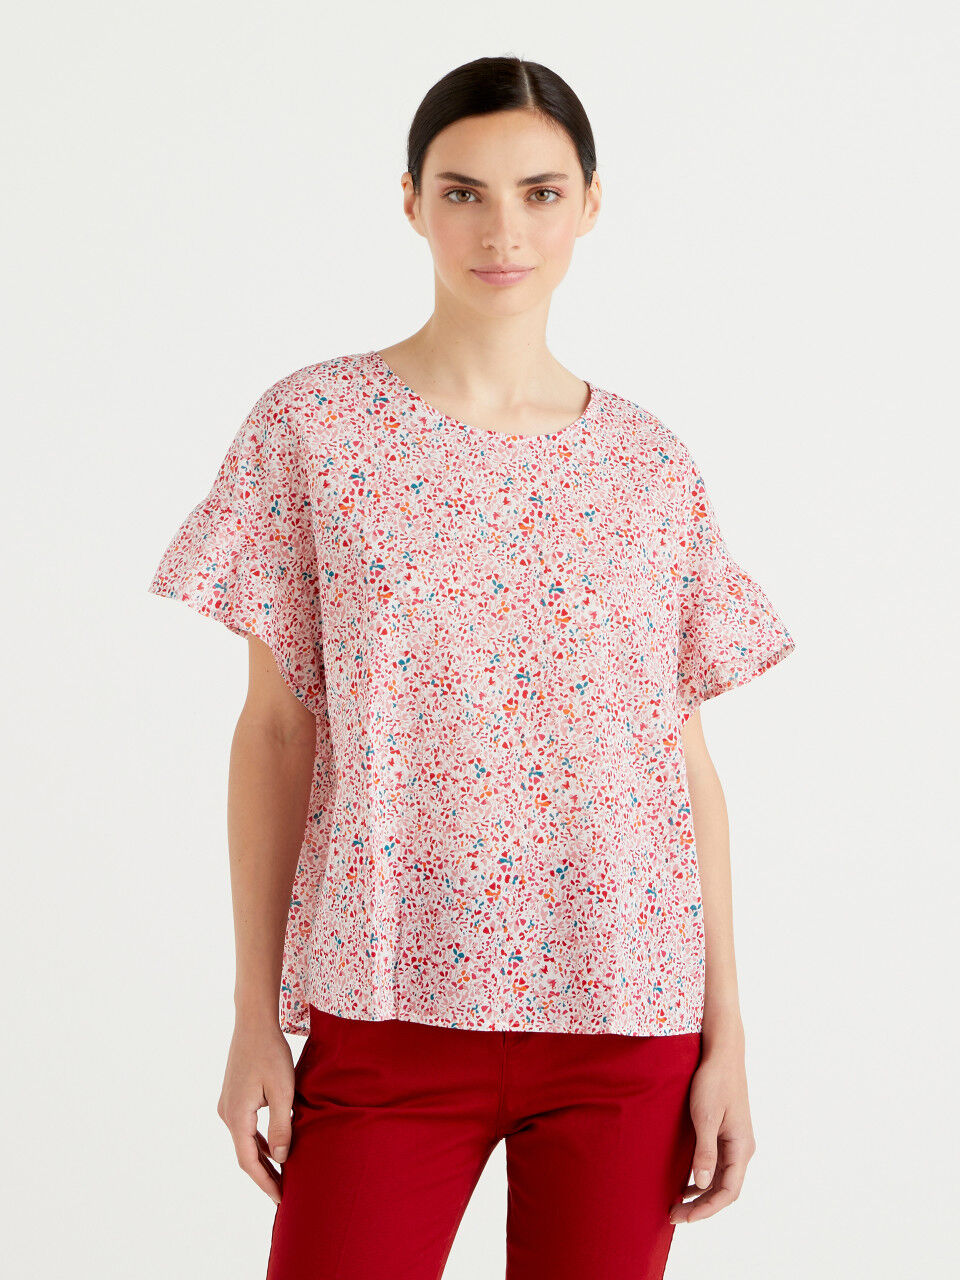 Patterned blouse in pure cotton